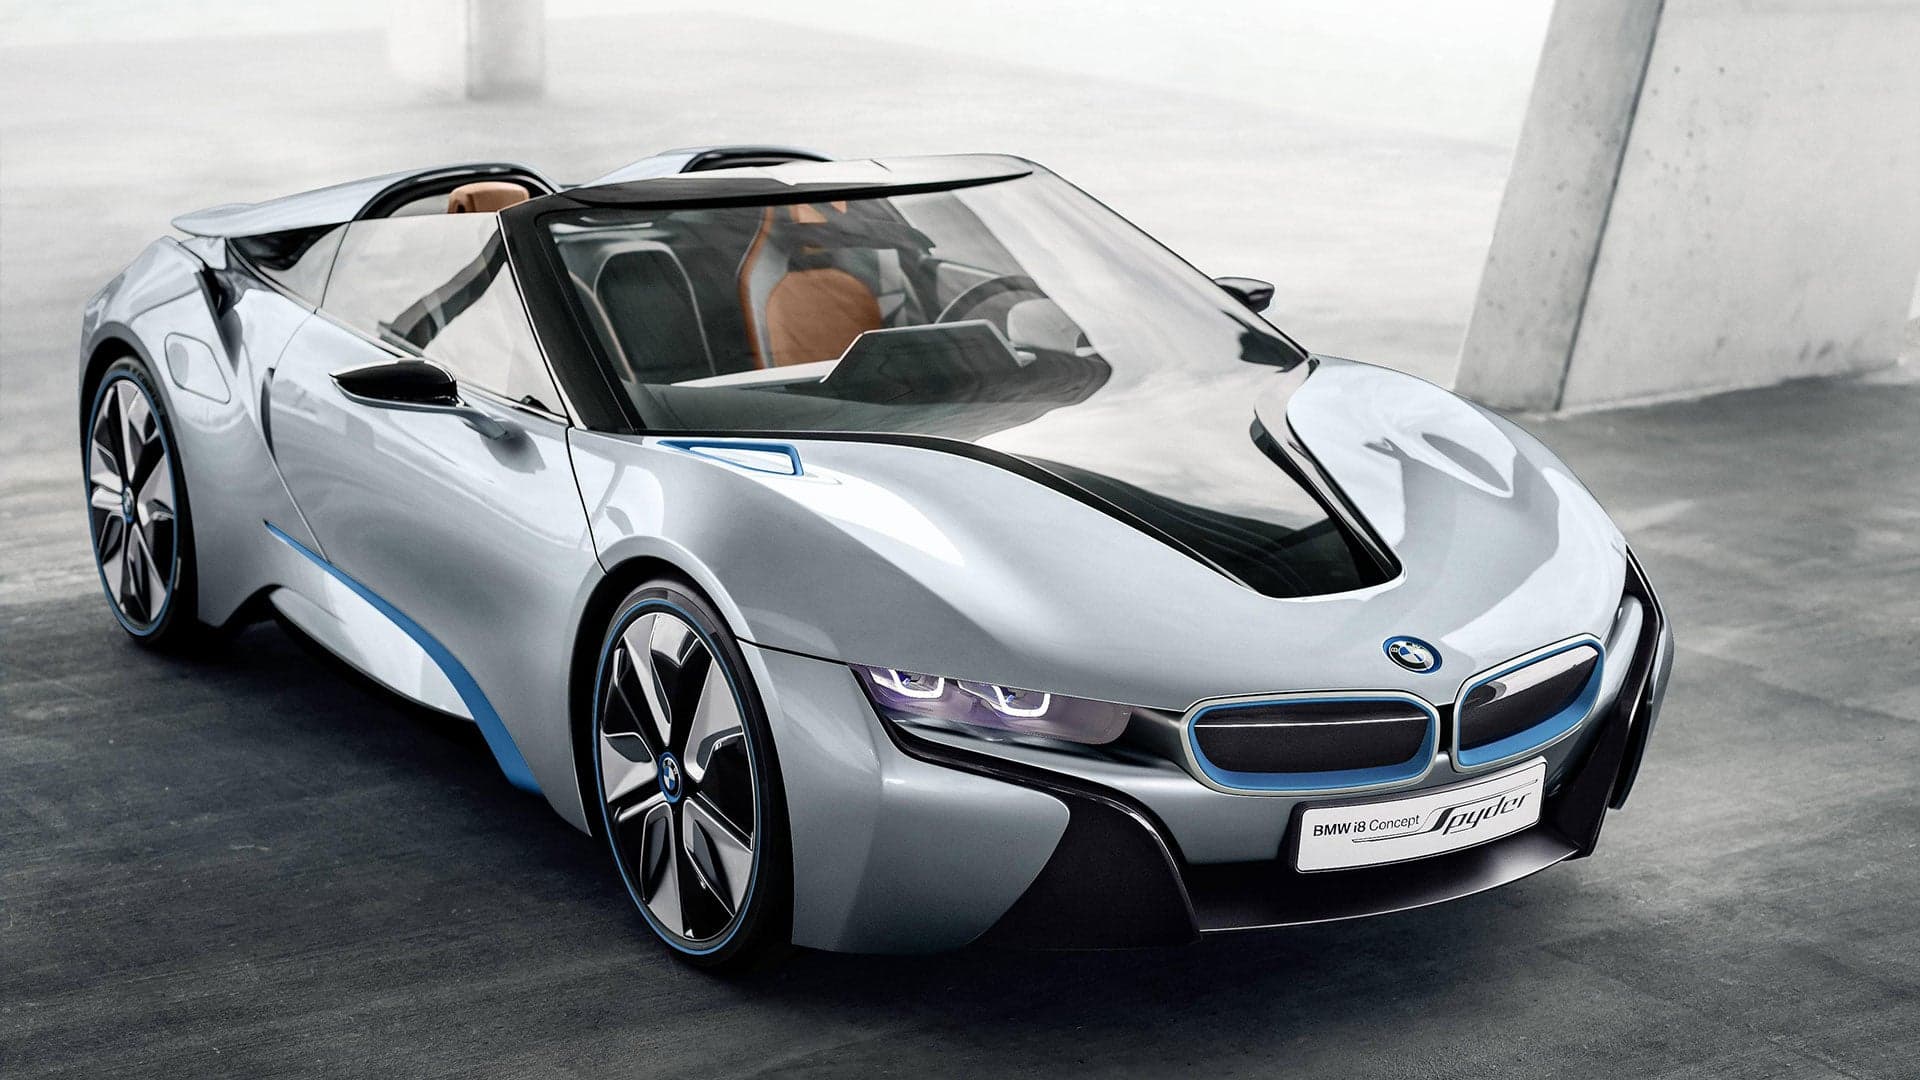 BMW CEO Confirms Production i8 Spyder Convertible